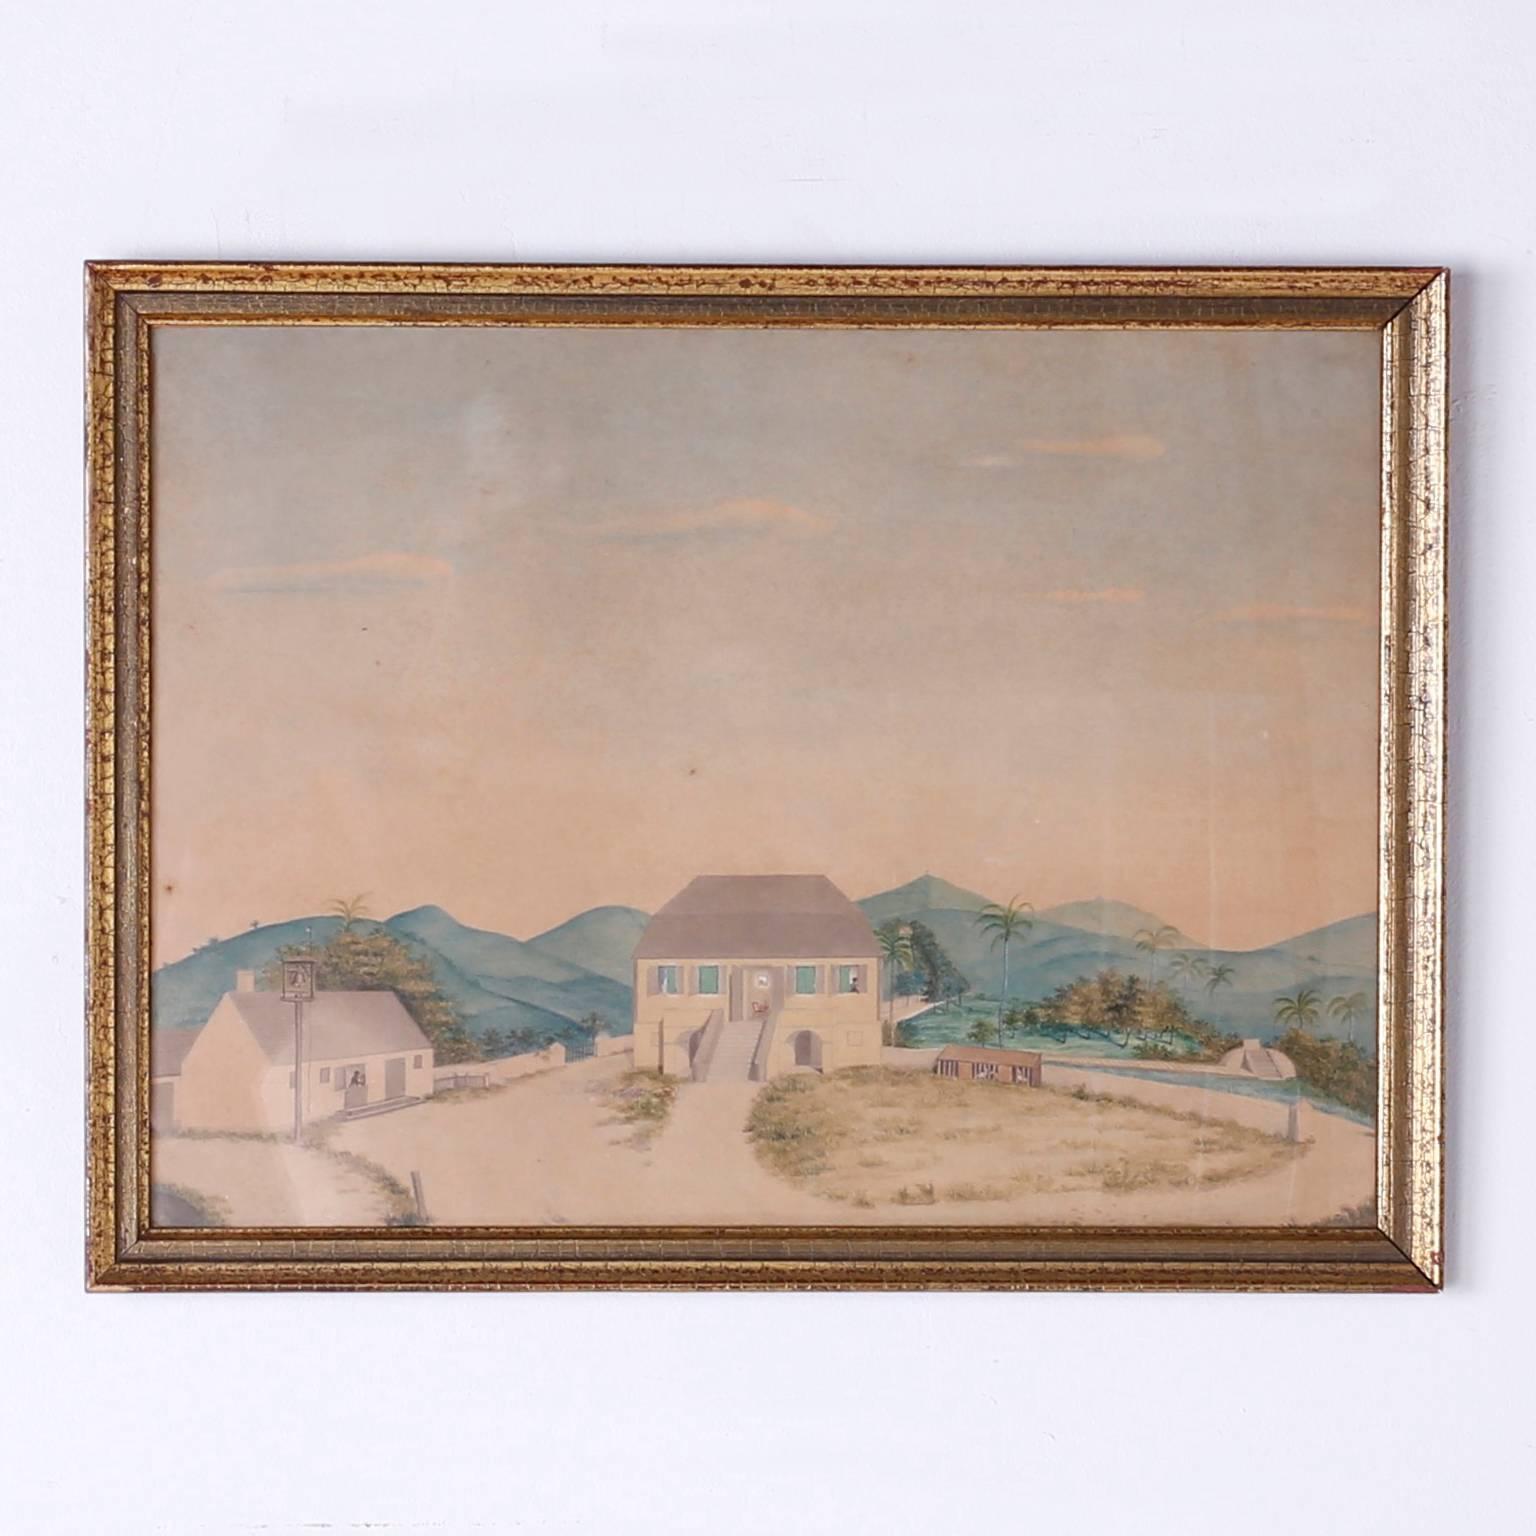 Here are four rare and historically important watercolor drawings on paper of St. Croix. Painted in a topographical style by L.J.Harboe, effectively transporting us to a time and place where you can hear the tranquility. Each watercolor has a label